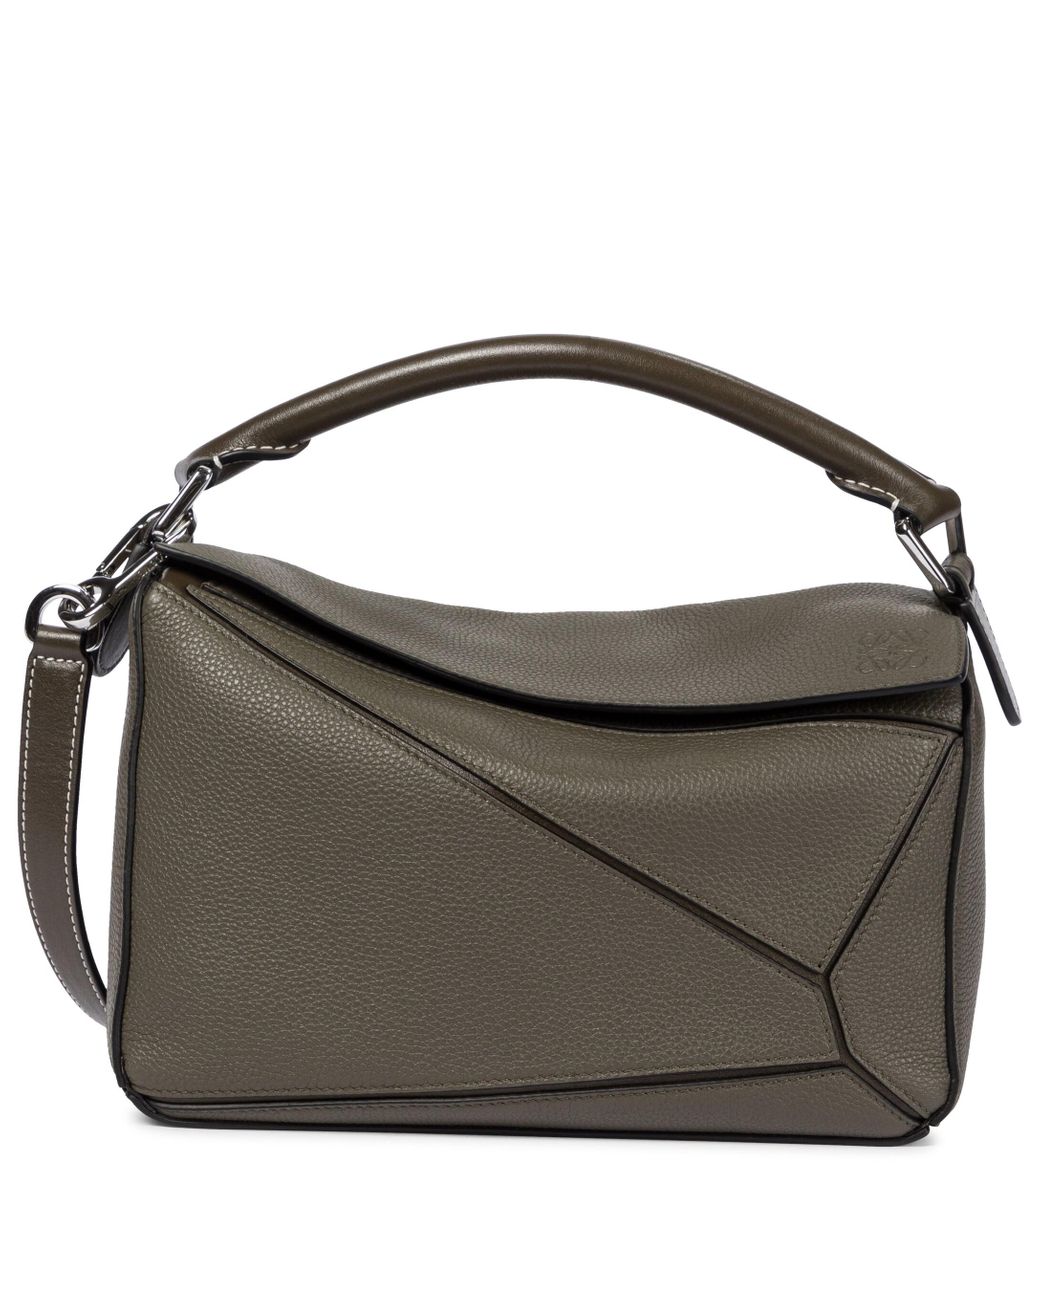 Loewe Puzzle Small Leather Shoulder Bag in Green - Lyst